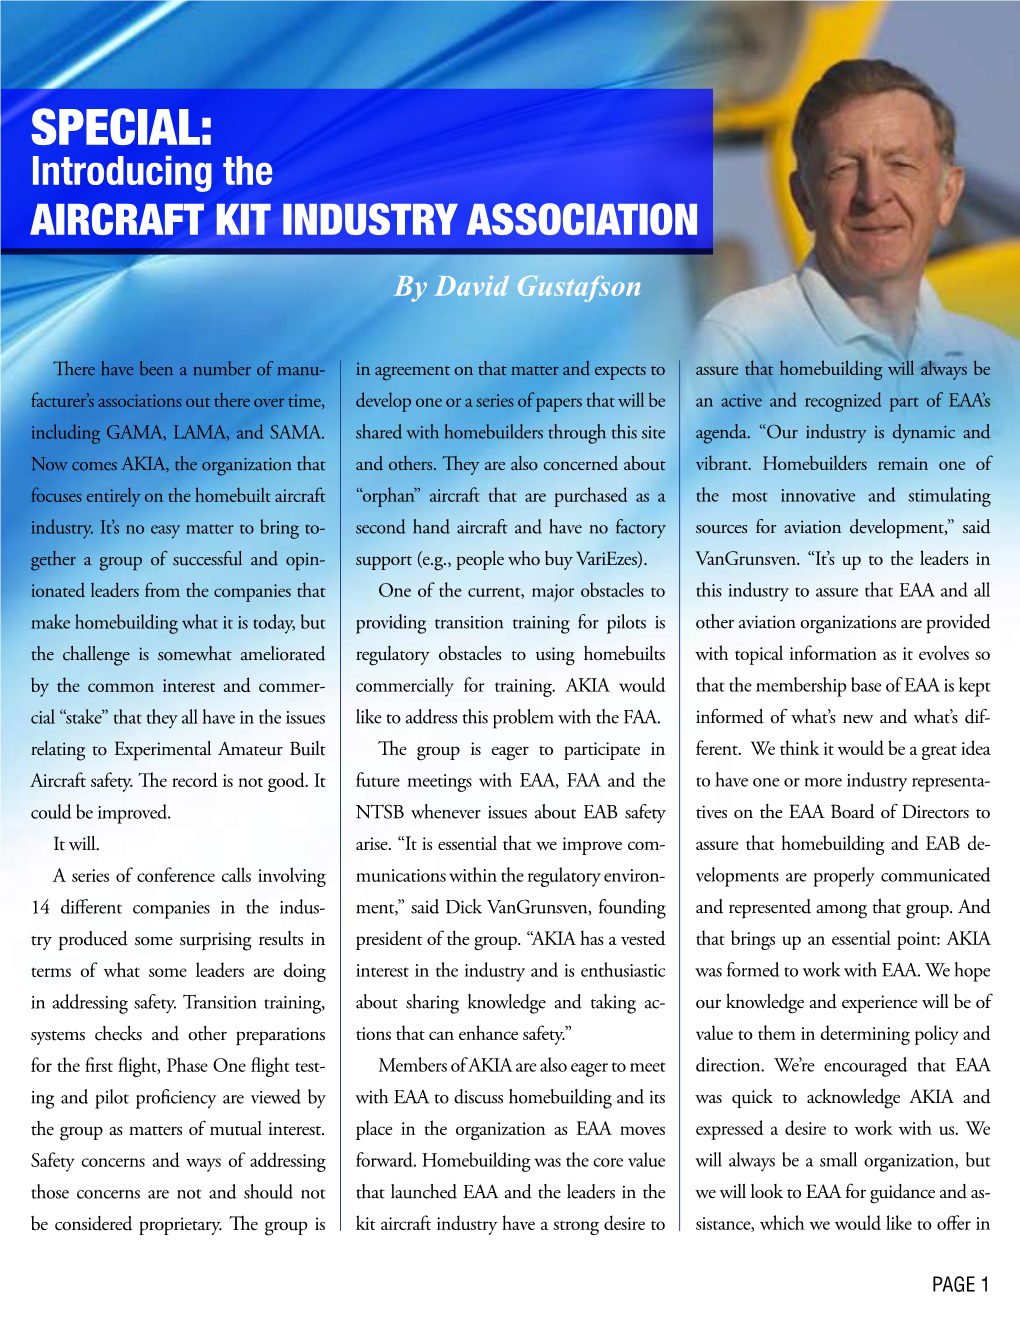 SPECIAL: Introducing the AIRCRAFT KIT INDUSTRY ASSOCIATION by David Gustafson